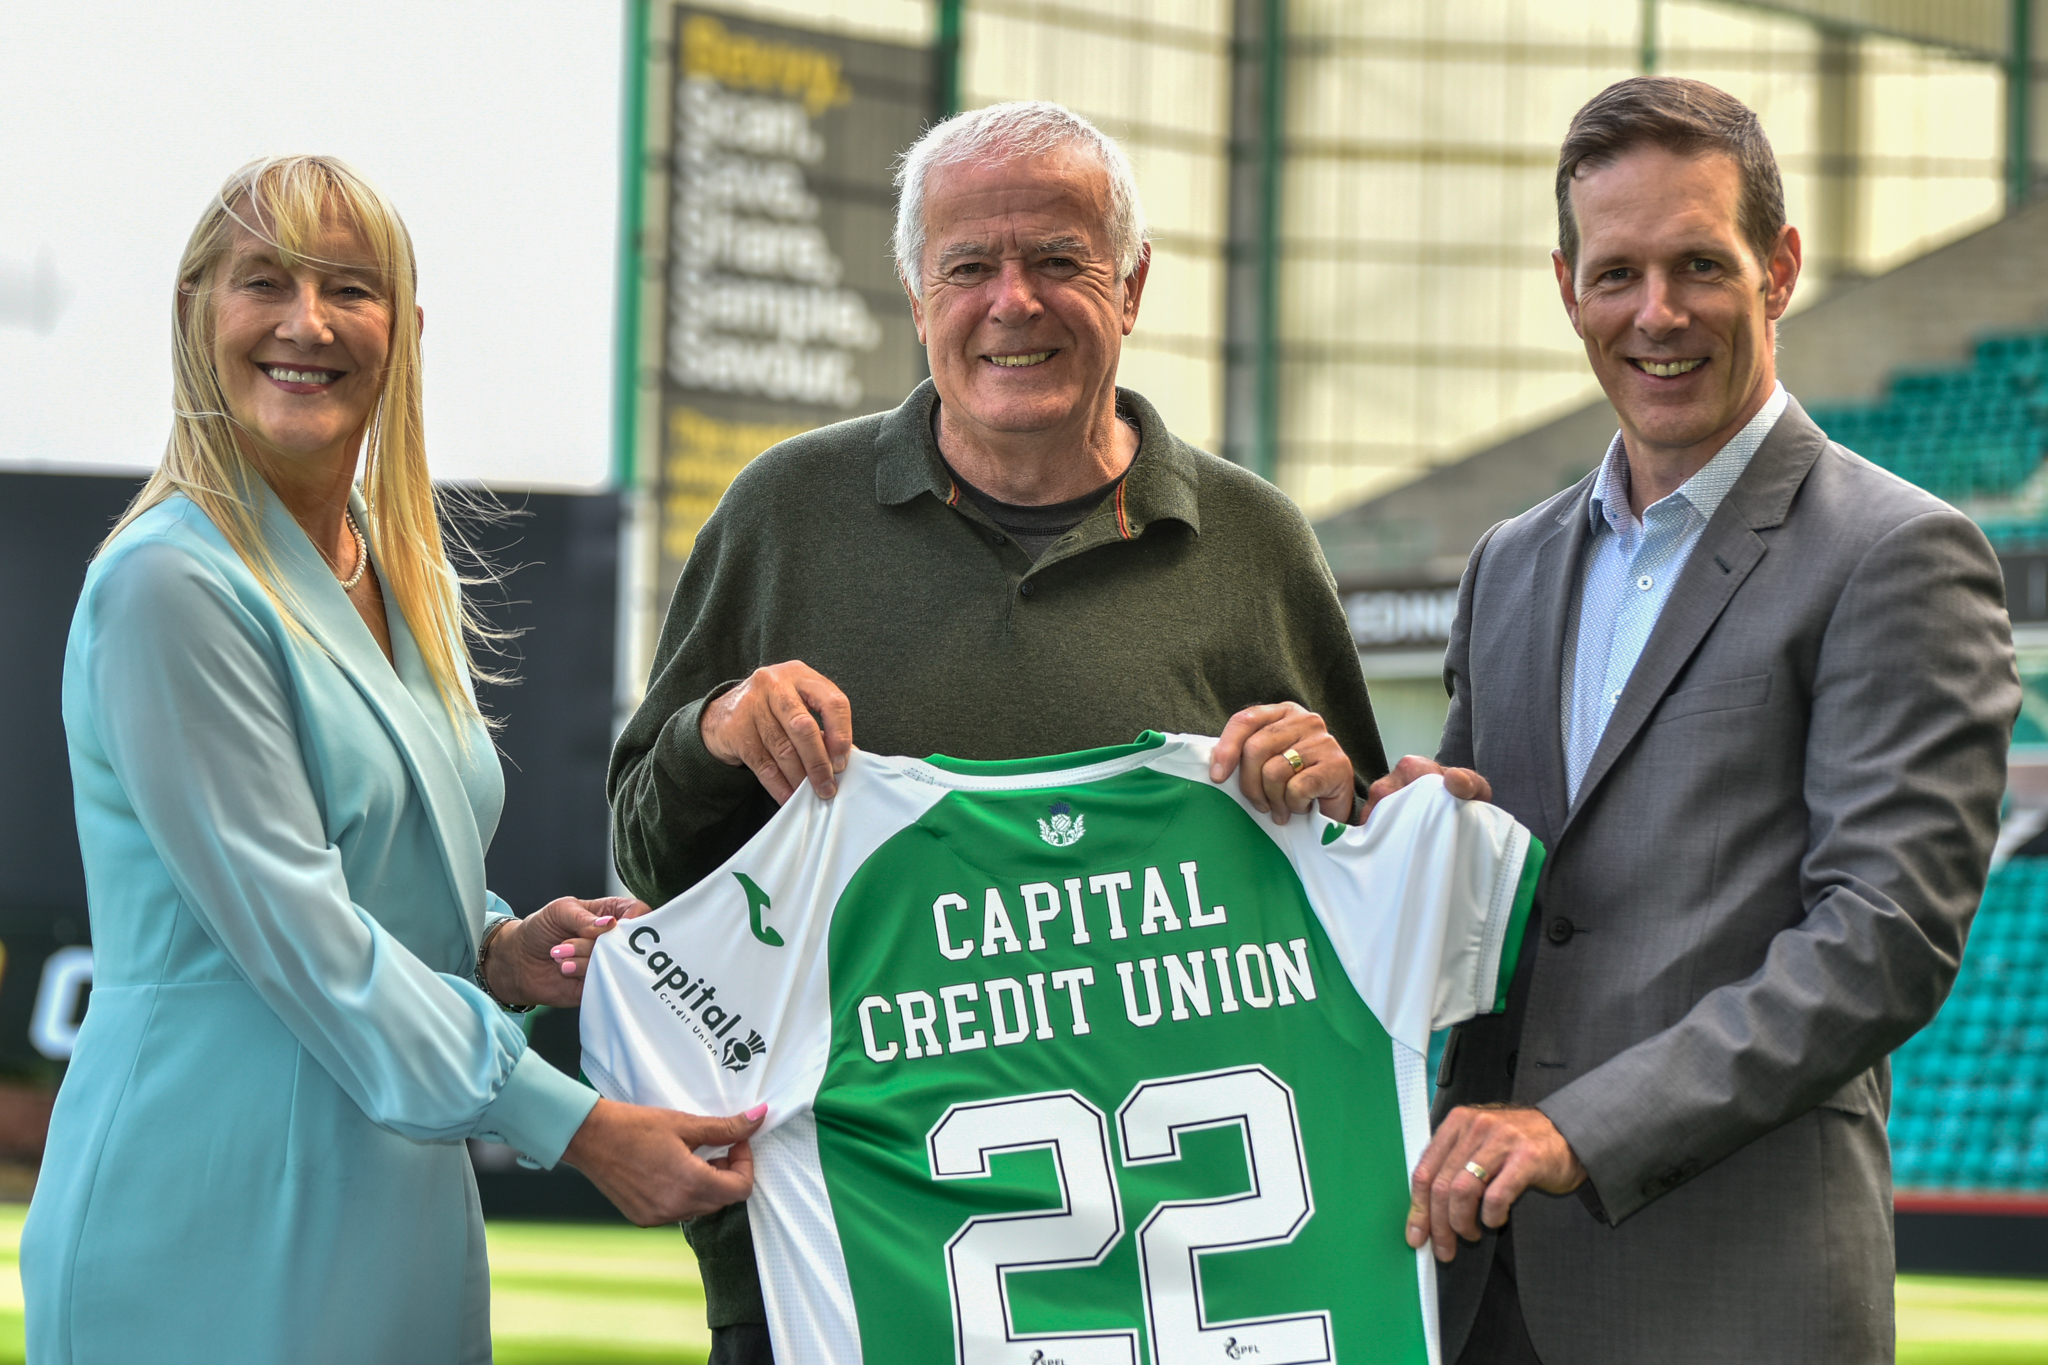 Capital Credit Union offers football fans interest free loans to buy their season tickets